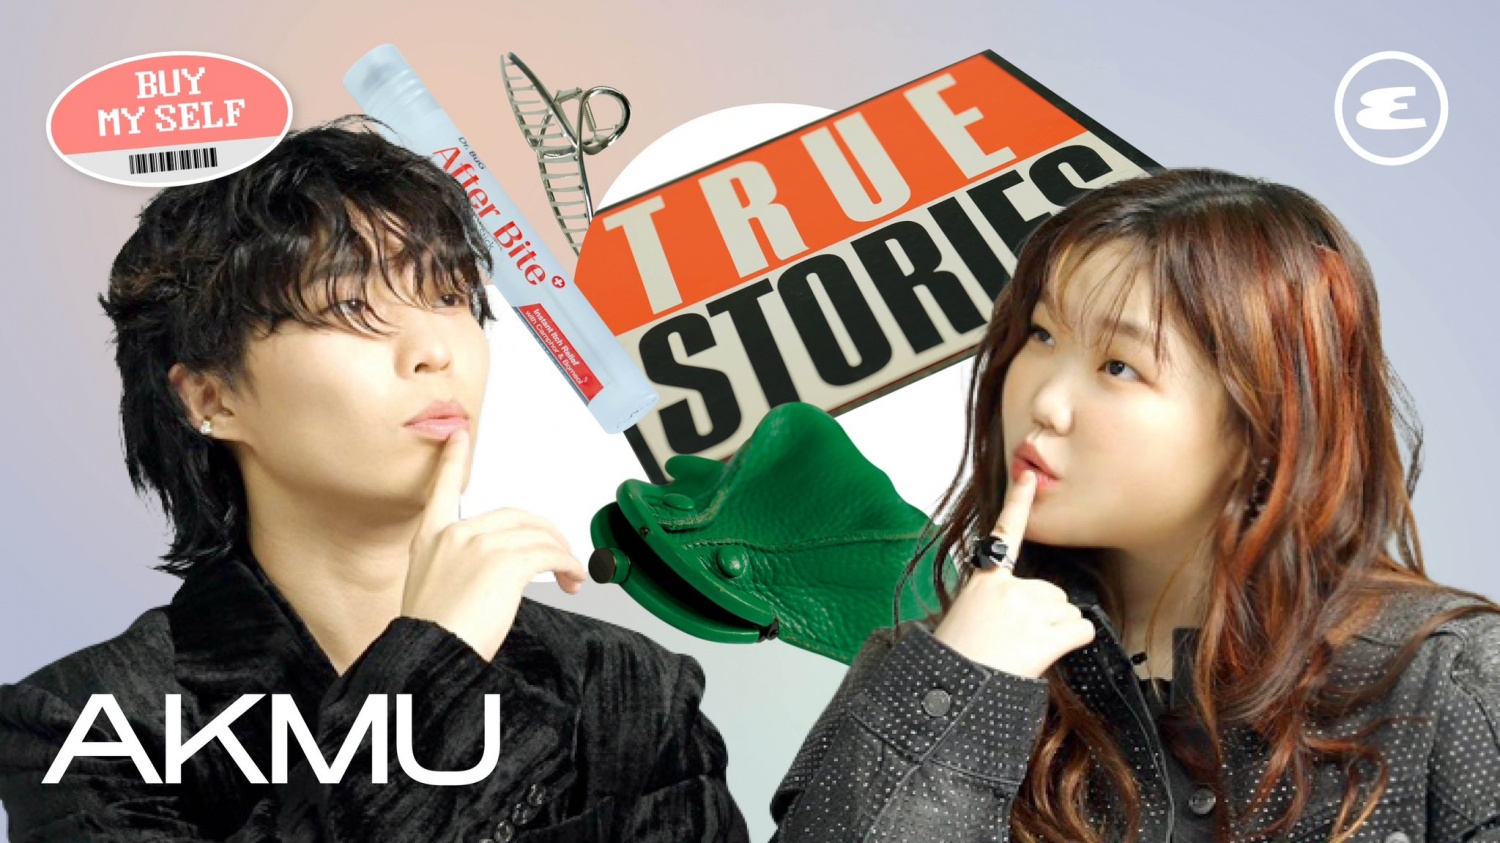 Just by looking at your eyes, AKMU